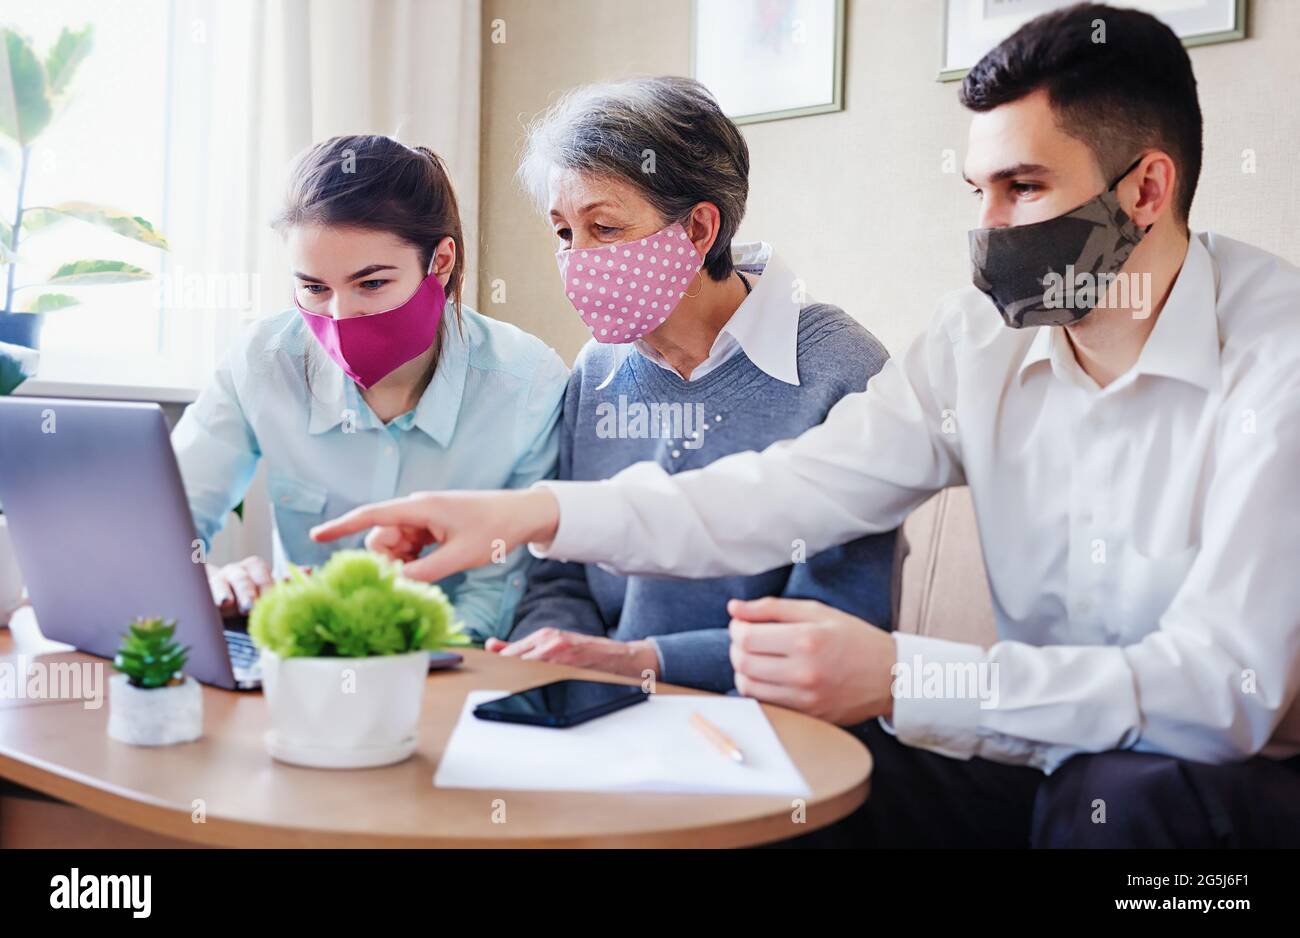 Relatives visit an elderly woman and help her find the necessary information on the Internet - Adult children and a mother wearing masks on her face i Stock Photo